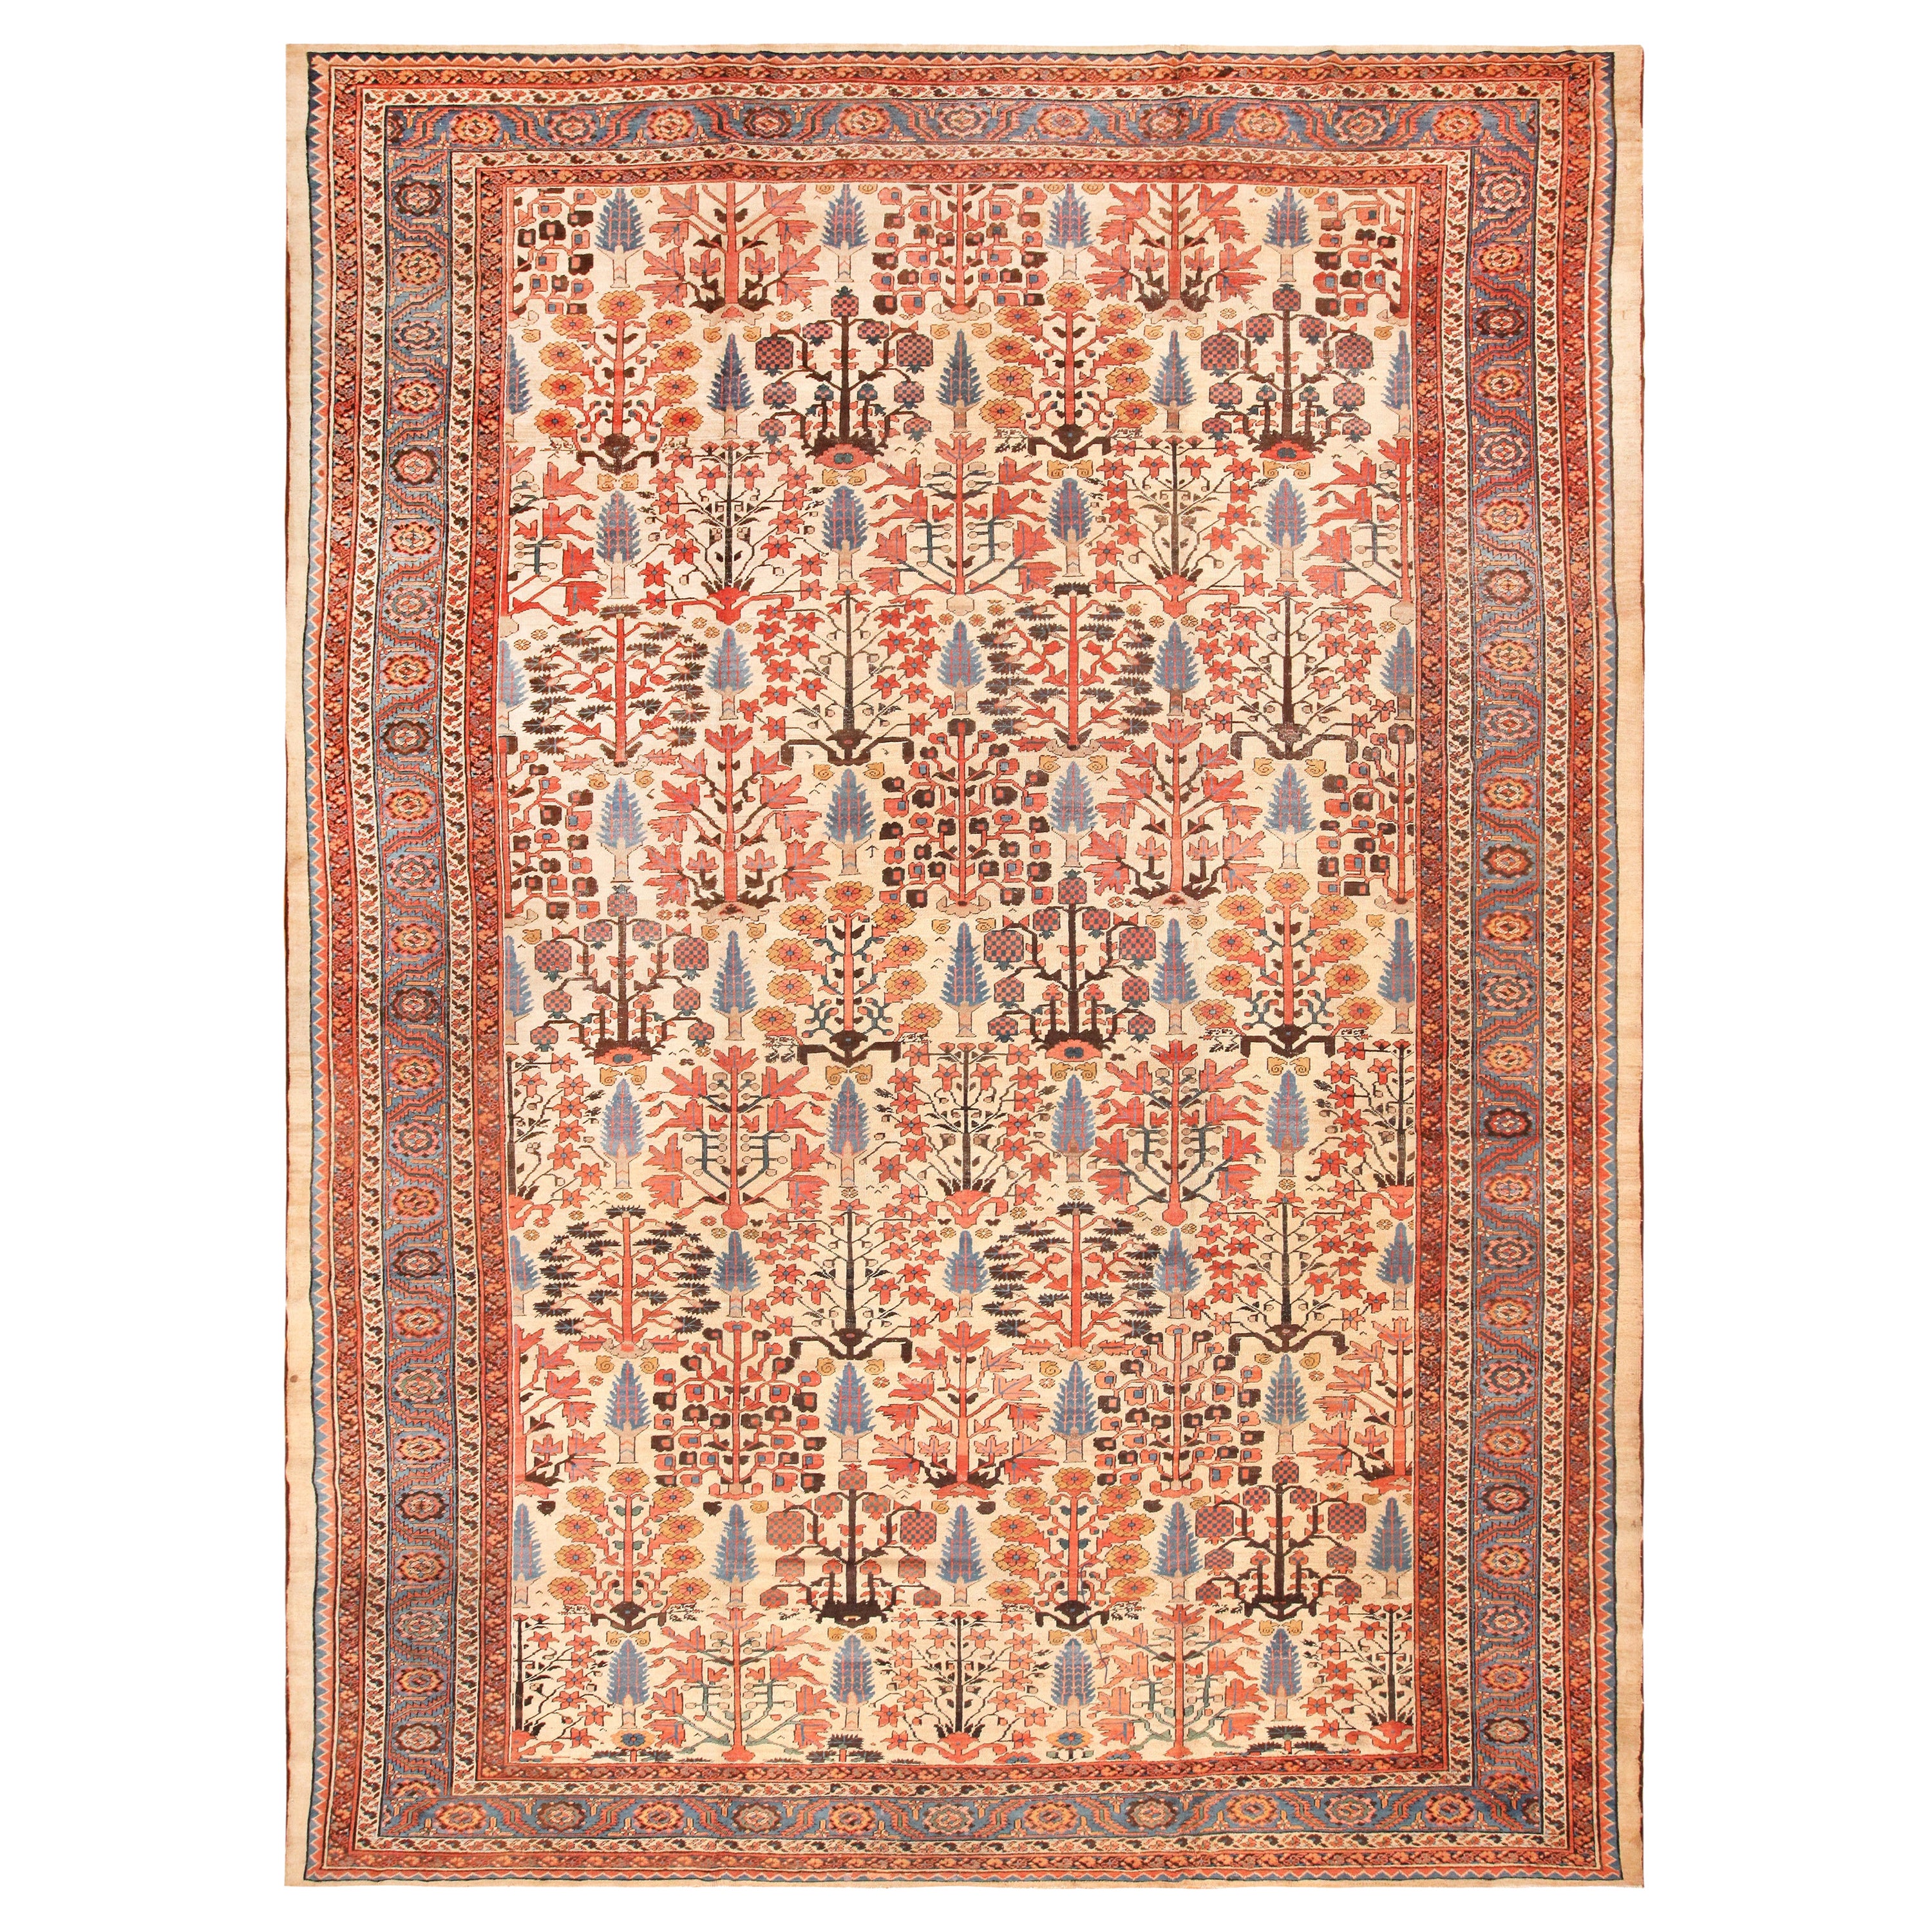 Nazmiyal Collection Antique Persian Bakshaish Rug. 13 ft 6 in x 18 ft 6 in